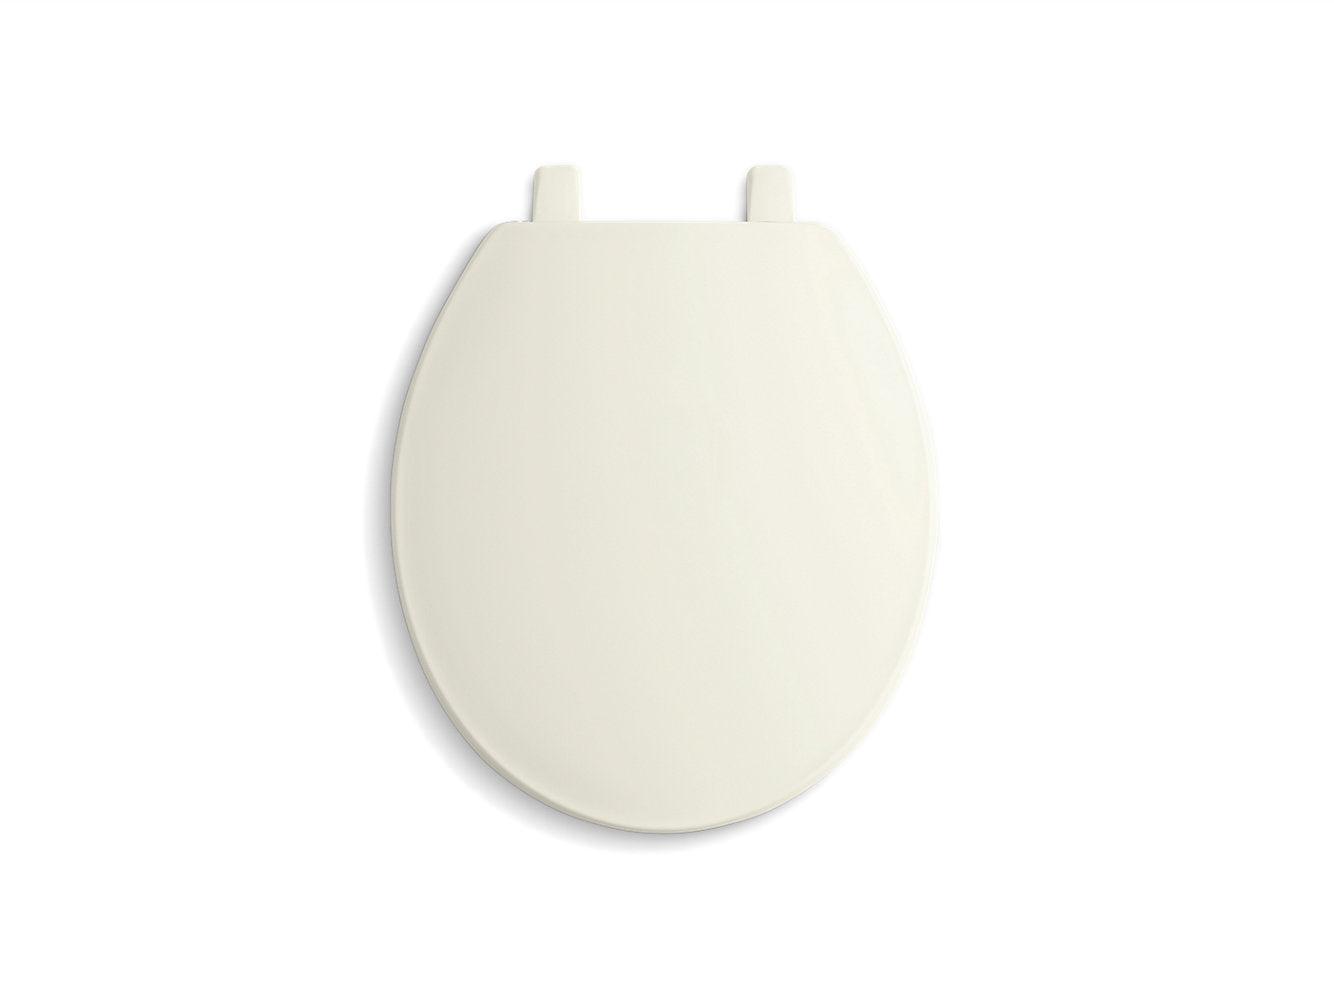 Kohler Brevia Quick Release Round Front Toilet Seat - Biscuit